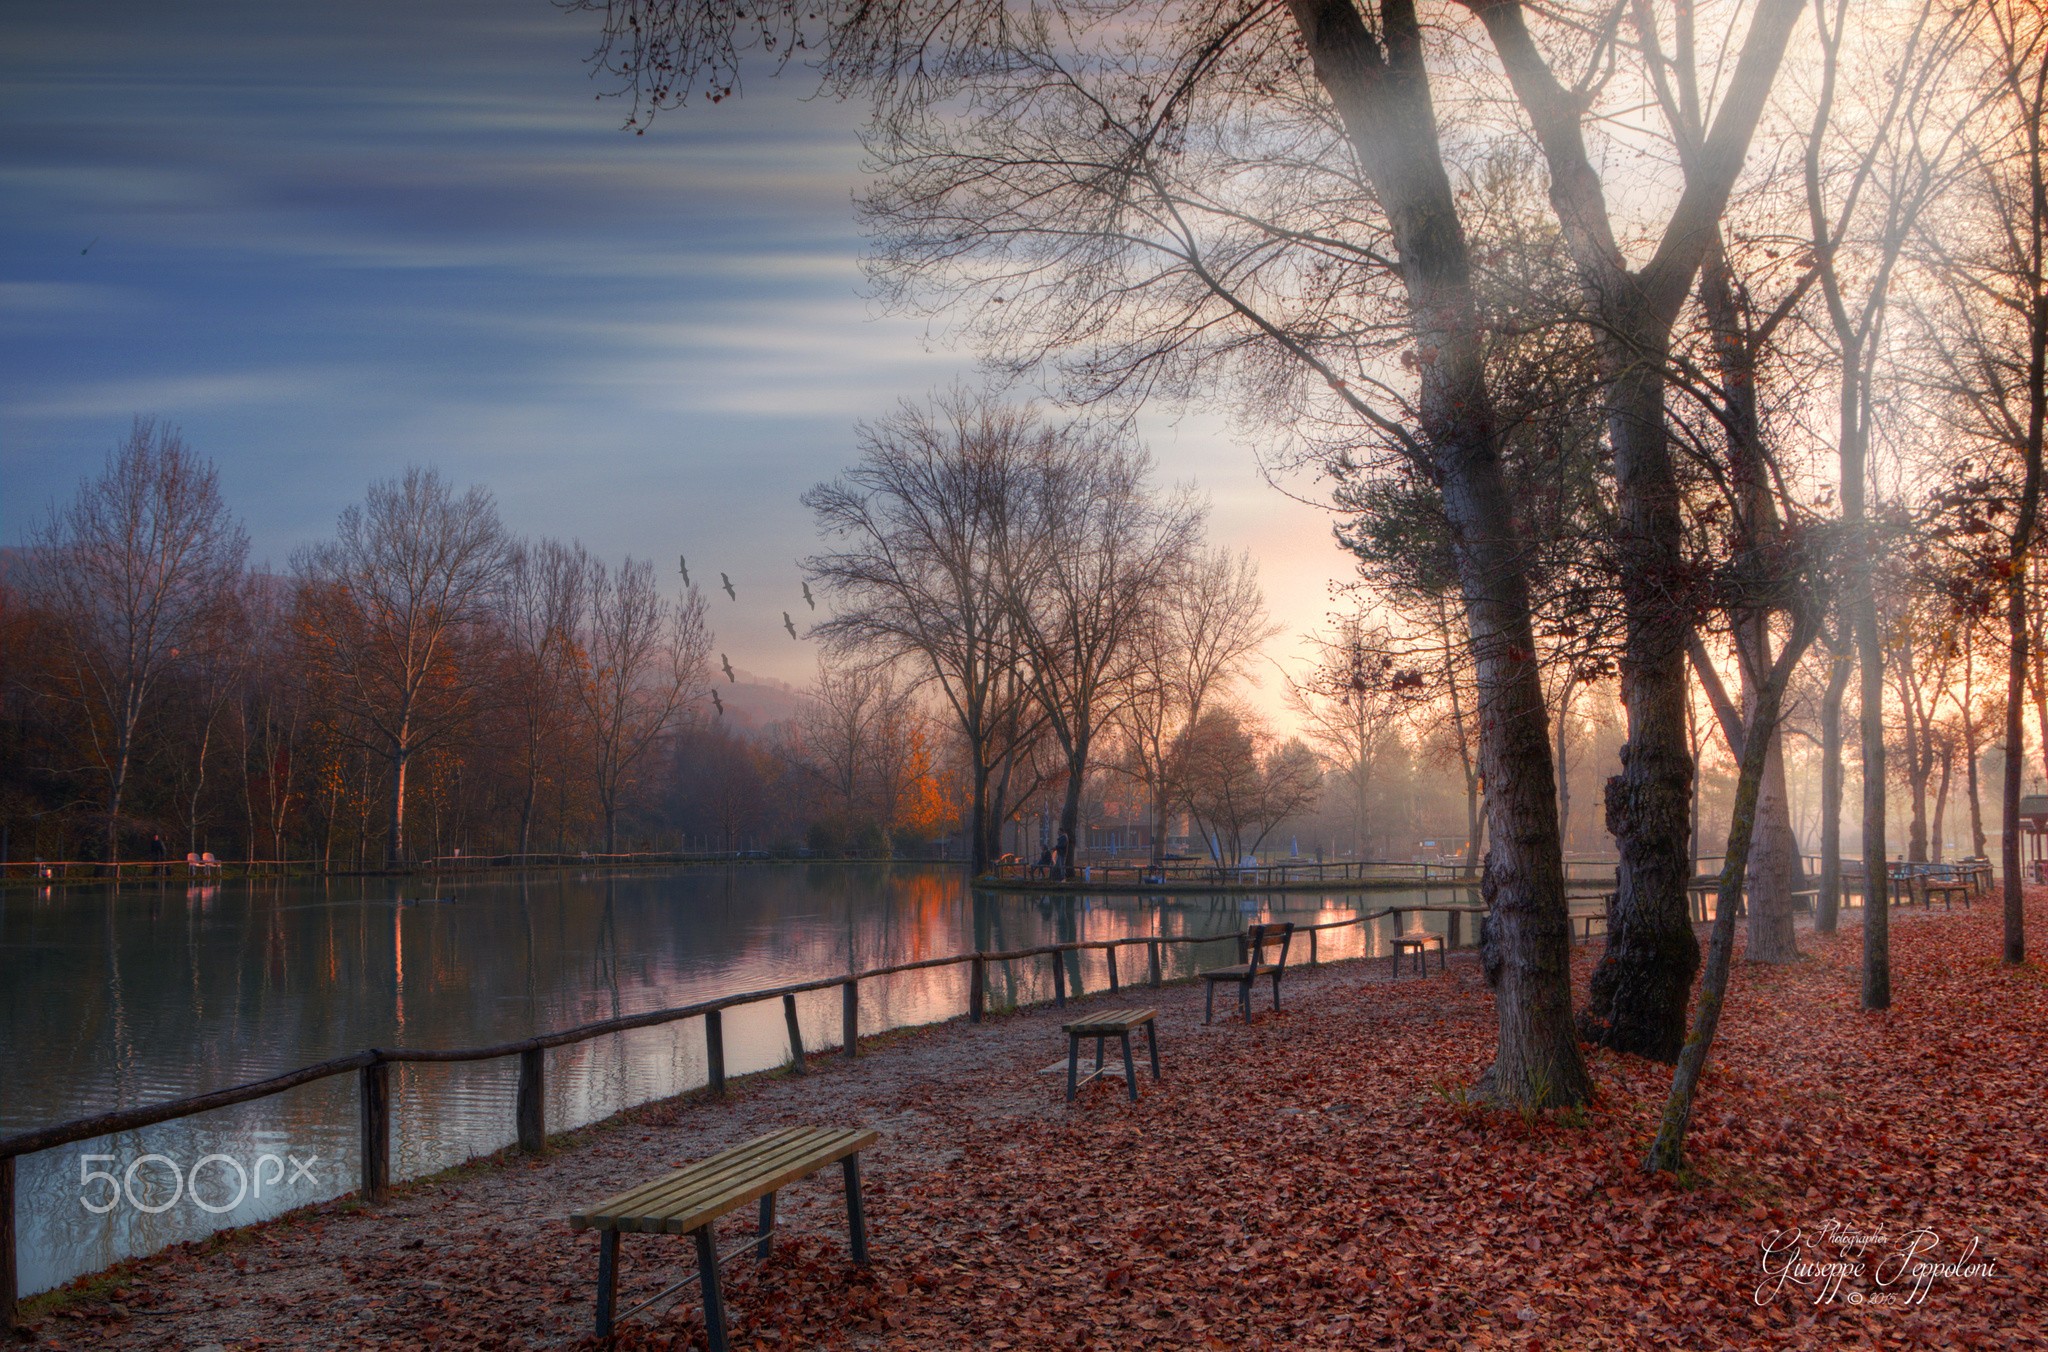 General 2048x1352 park lake bench fallen leaves outdoors sunlight water 500px watermarked